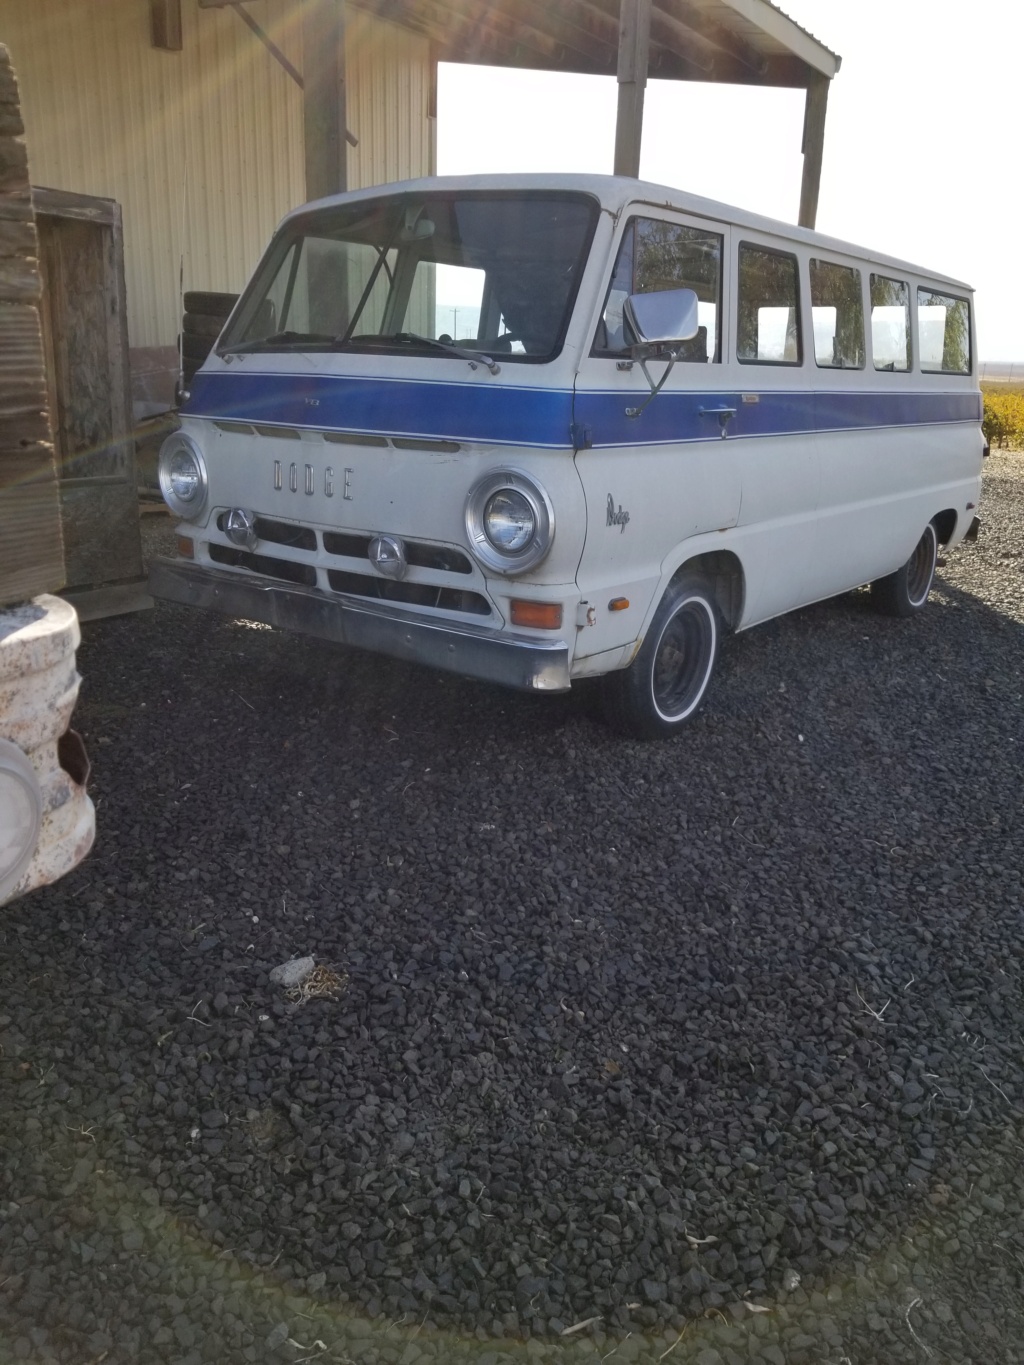 Pictures of my new project 1969_d10